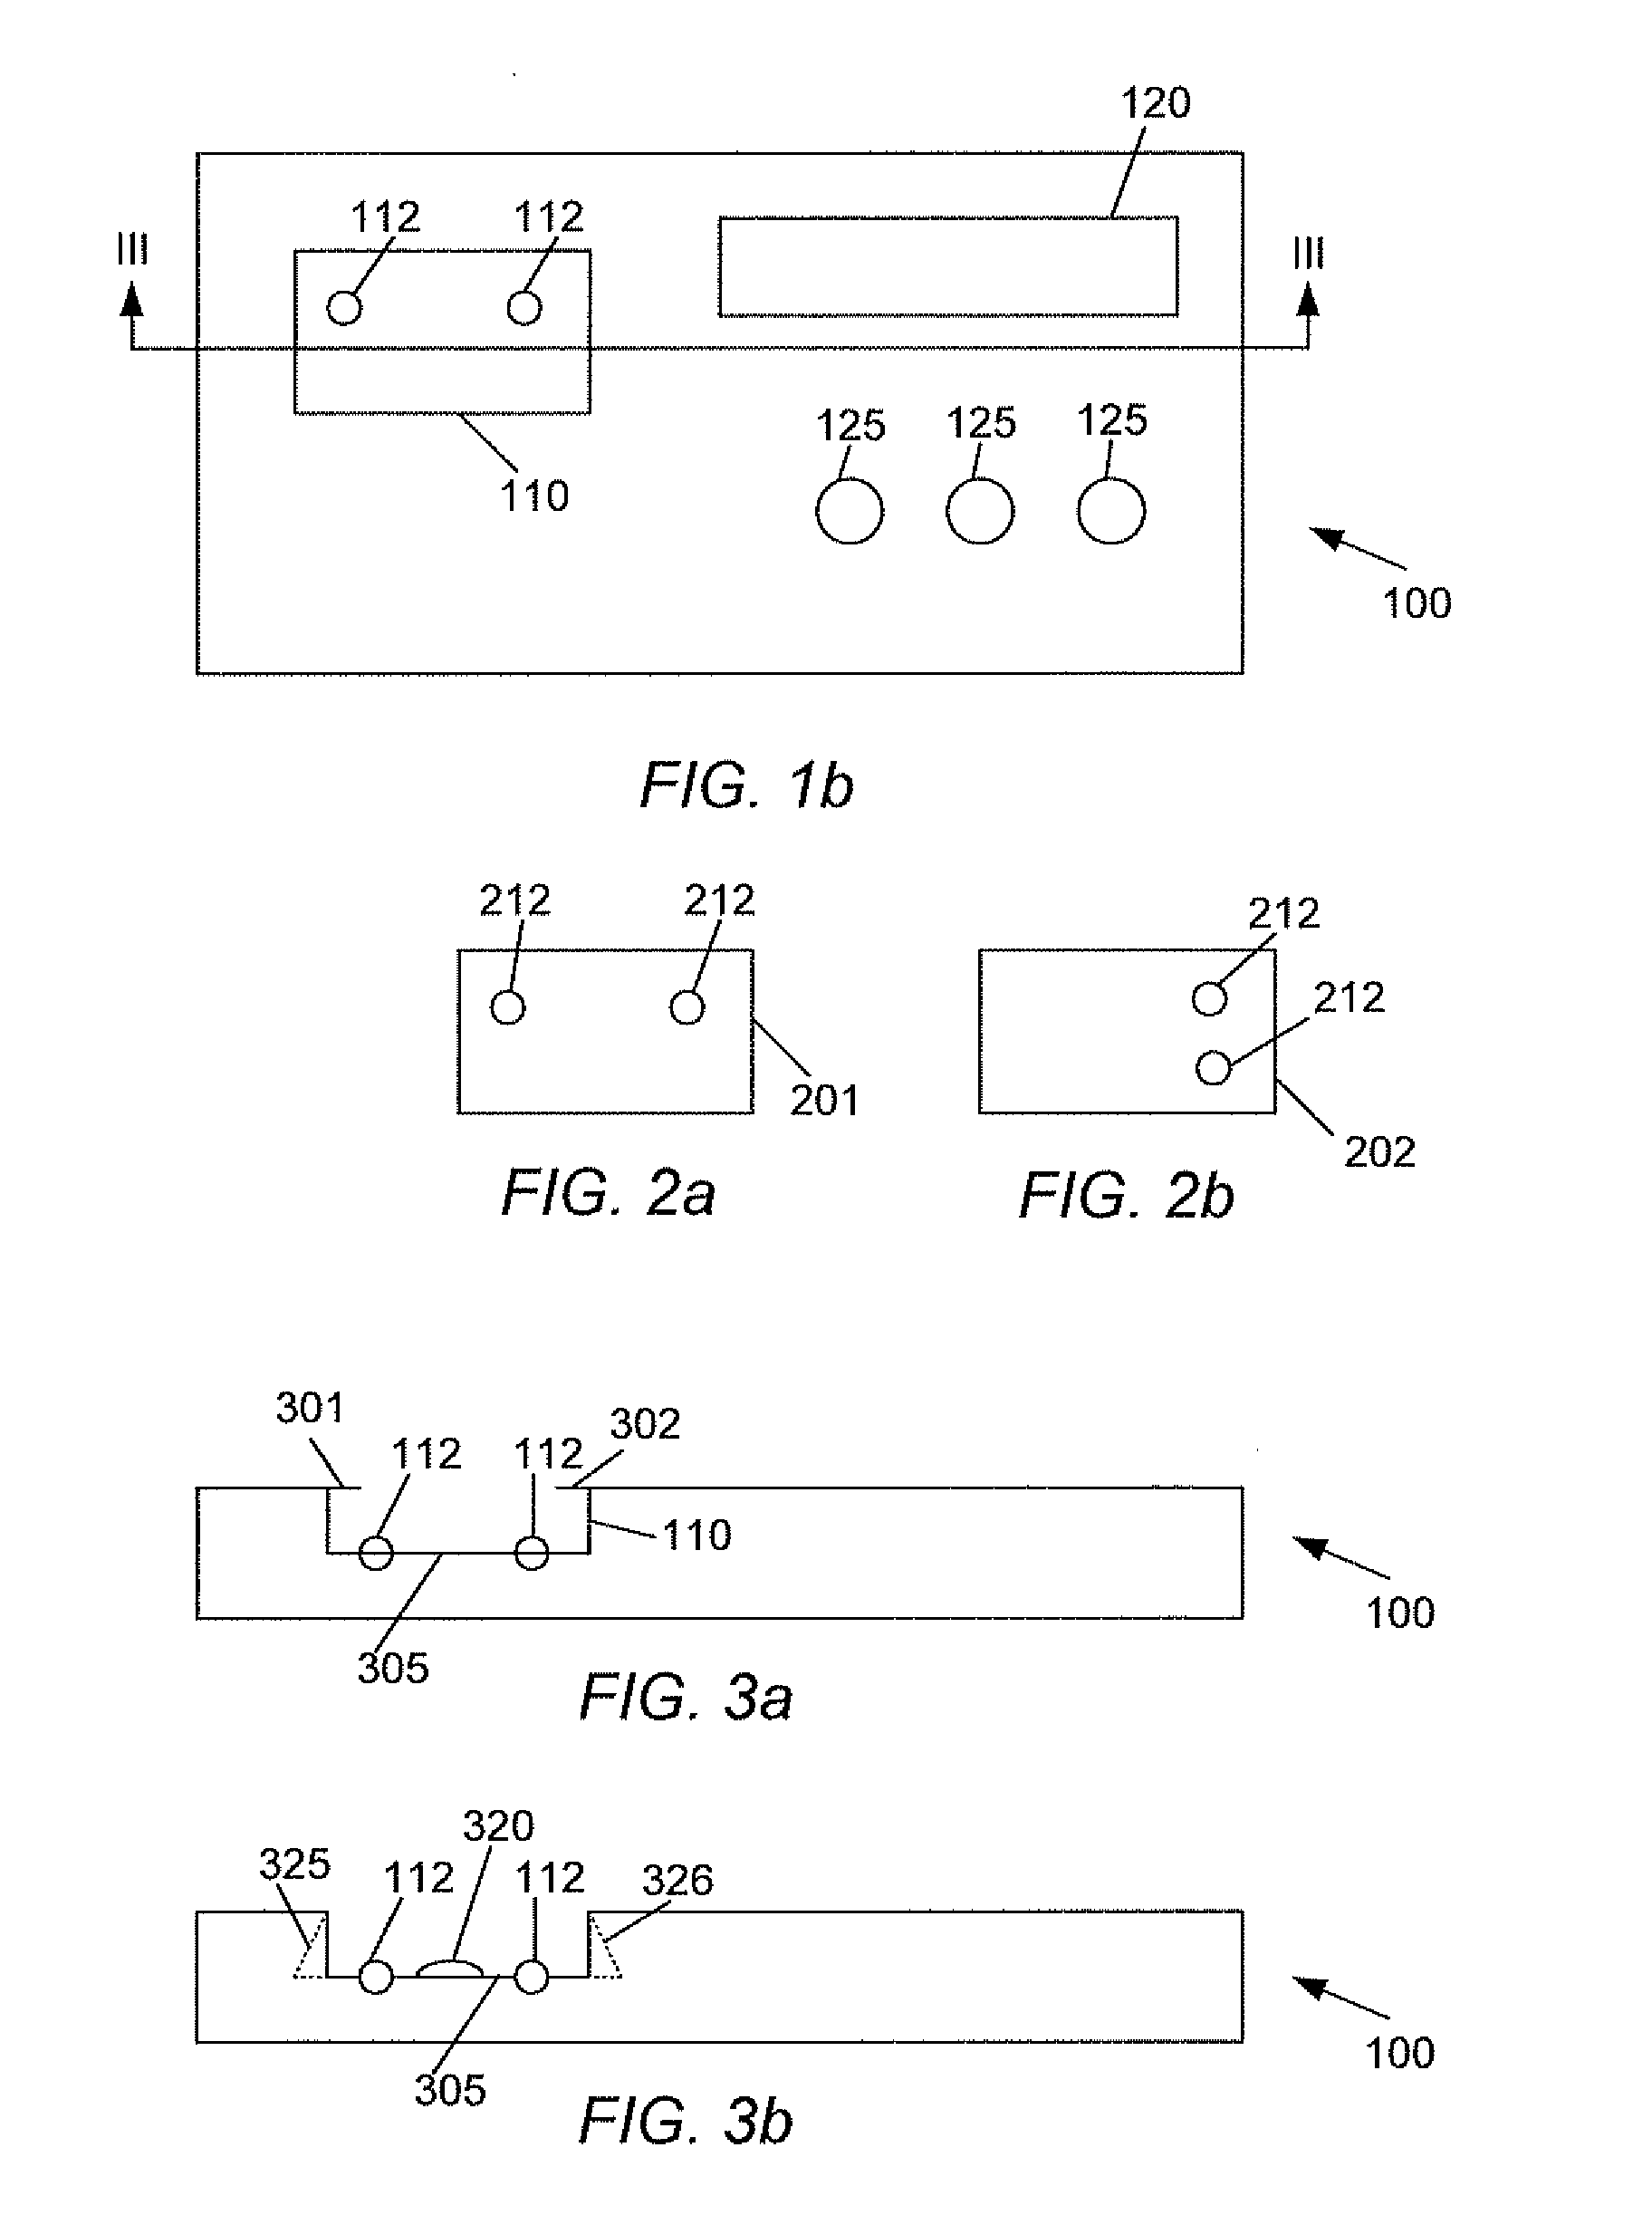 Card Configured To Receive Separate Battery